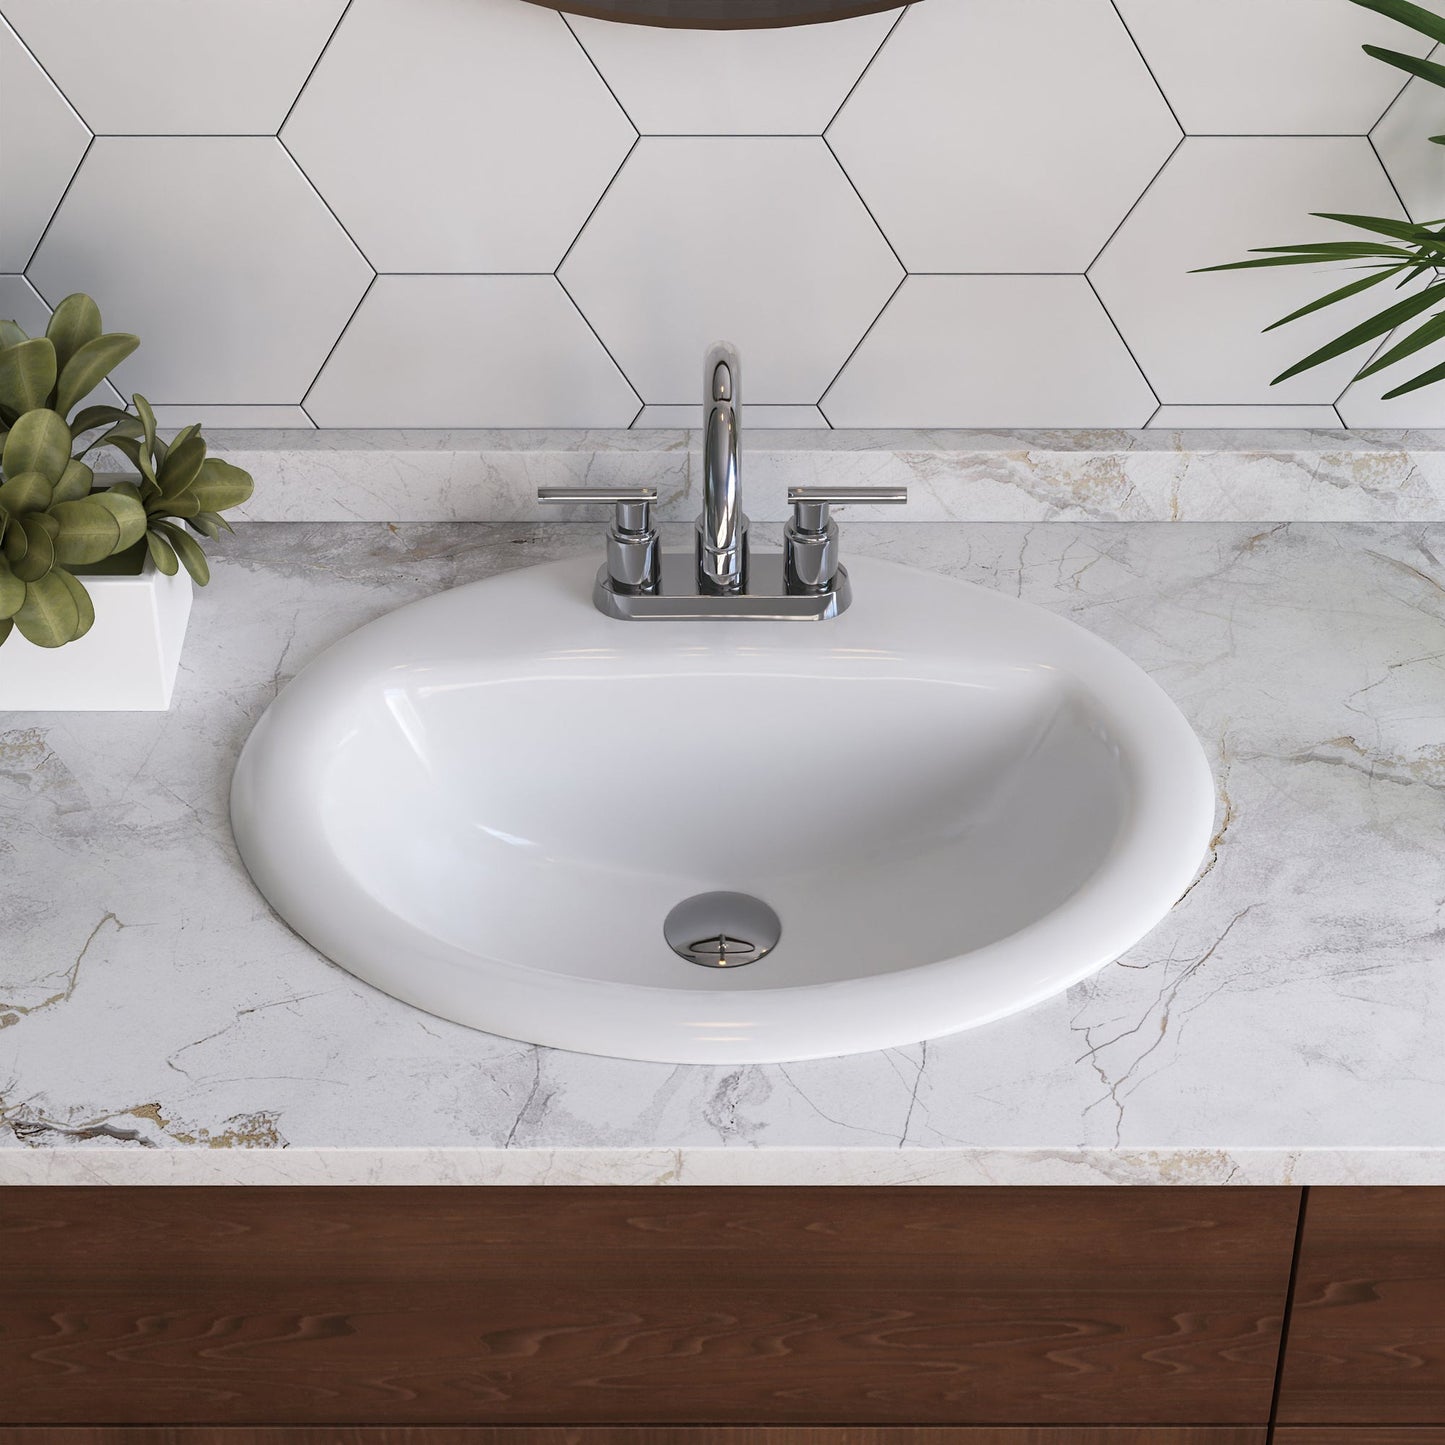 DeerValley 17" Round White Drop-in Bathroom Sink With Overflow Hole